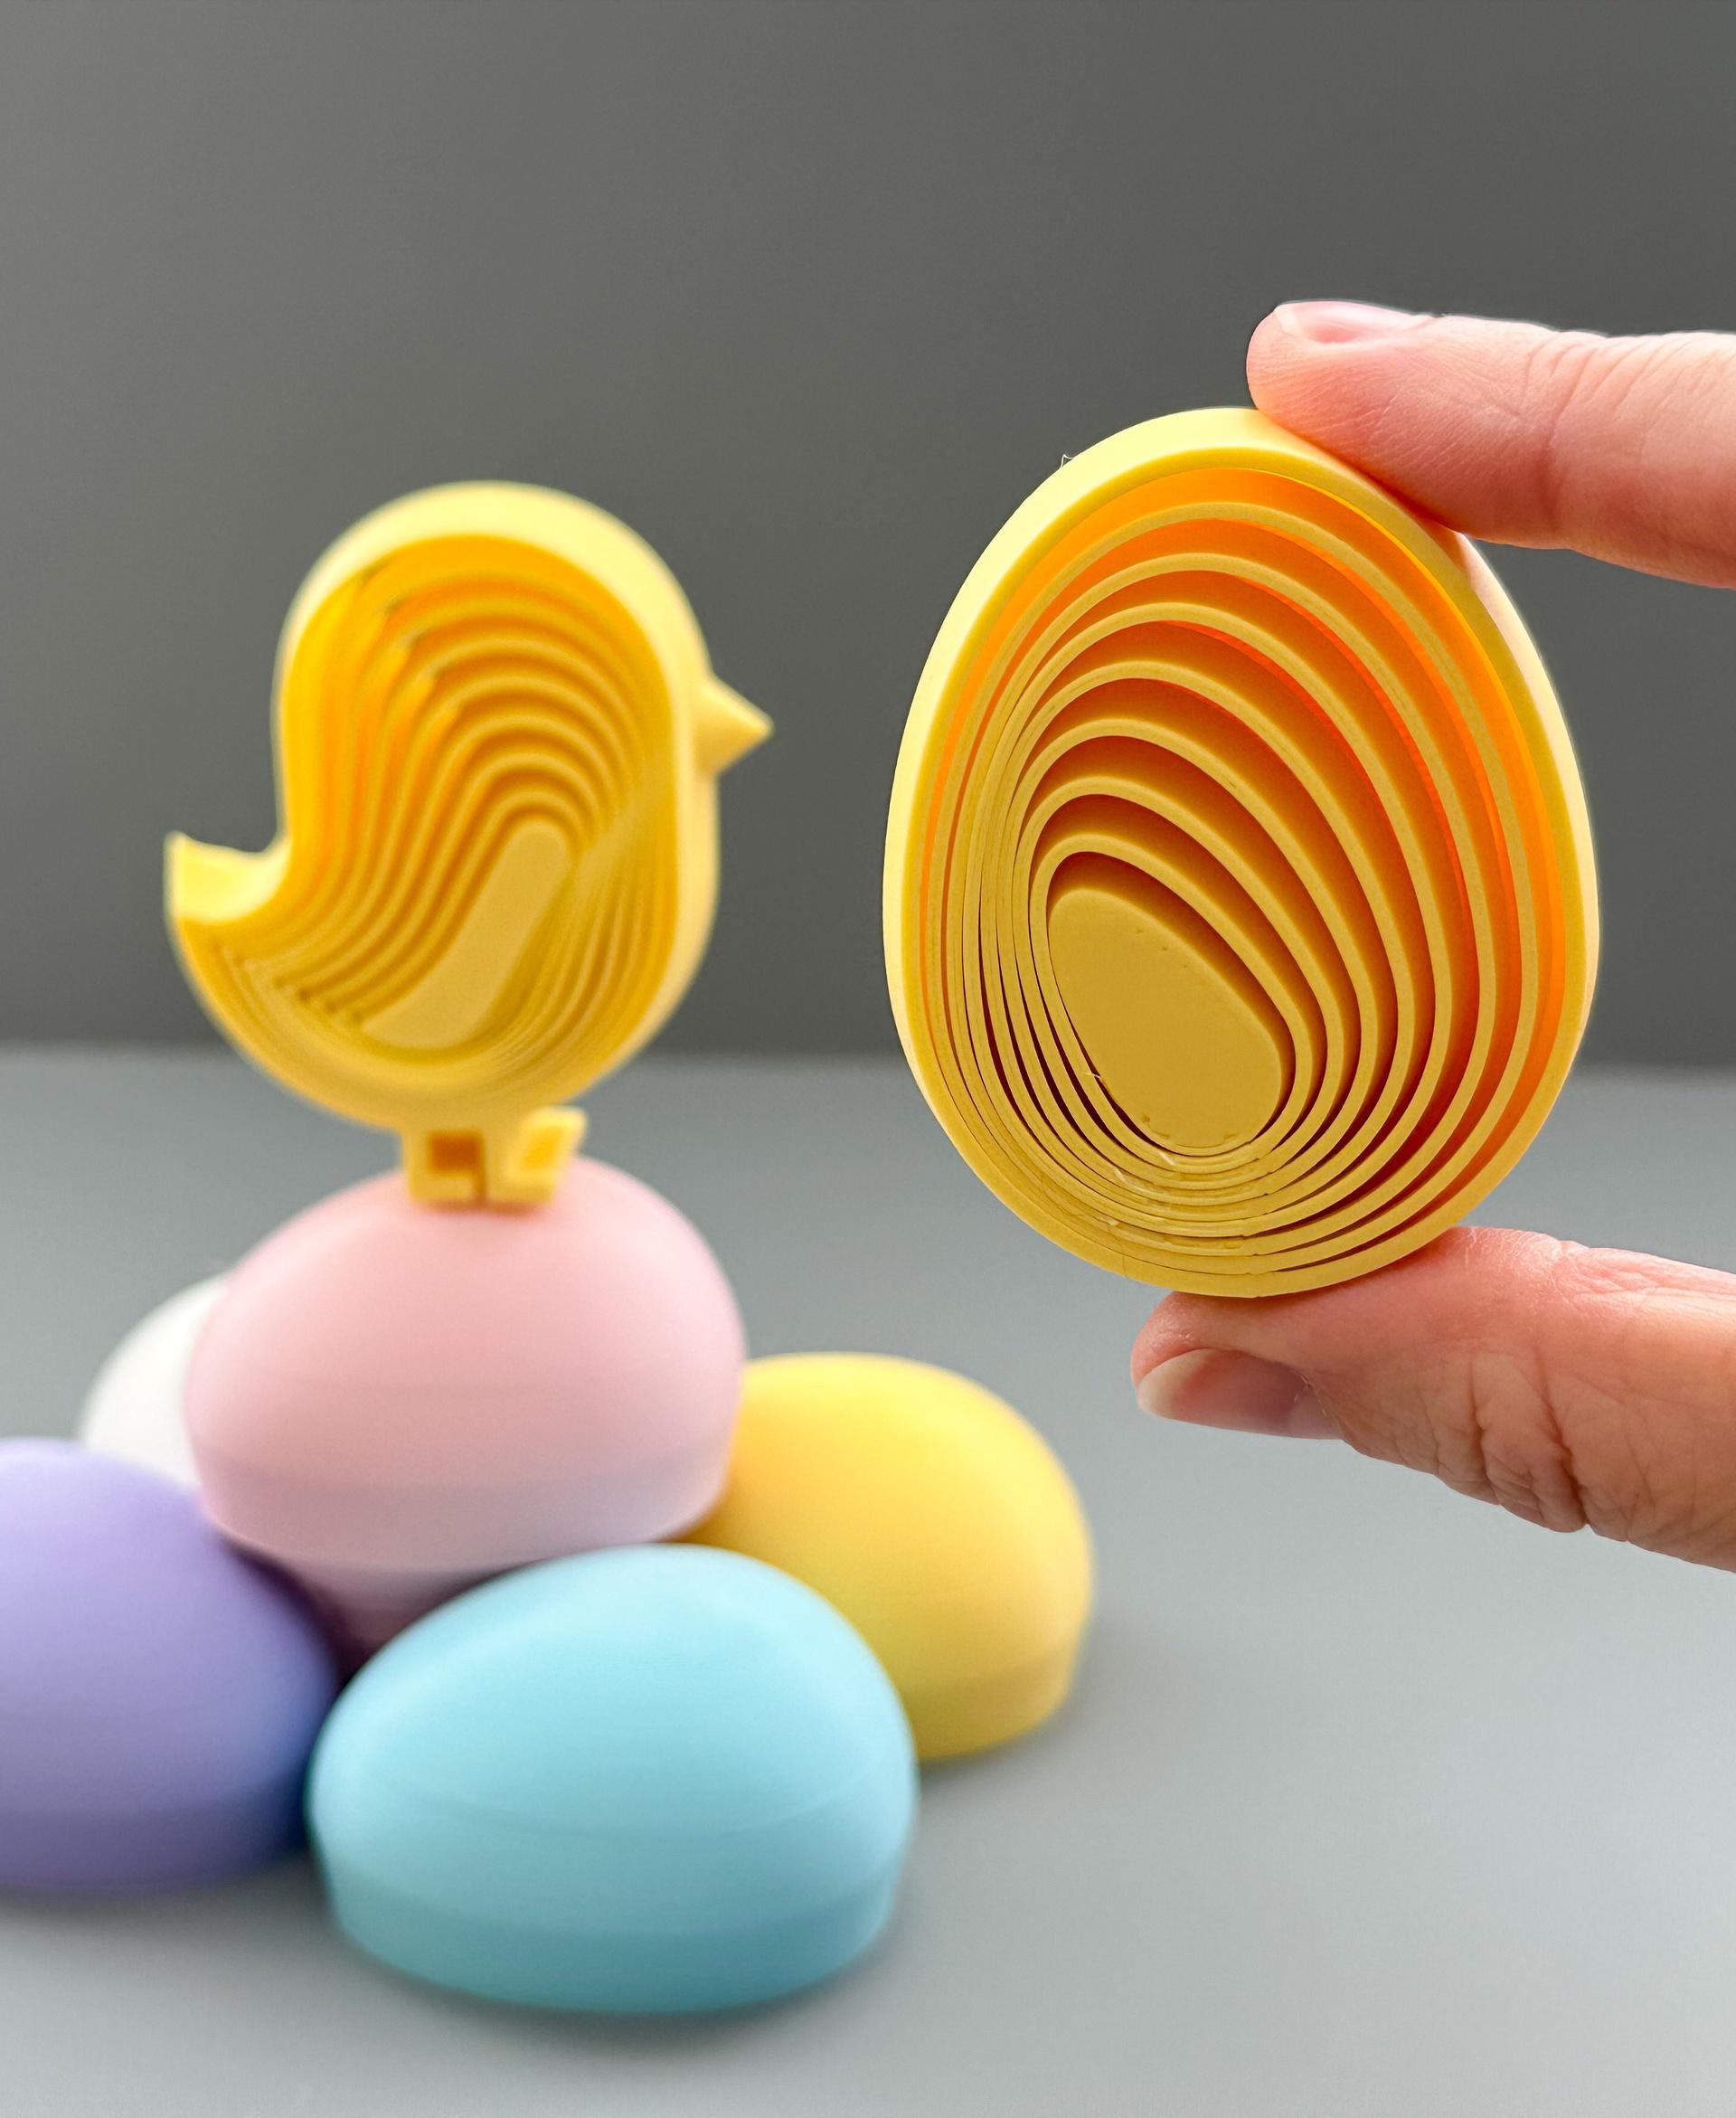 Baby Chick and Easter Egg Layered Fidgets 3d model